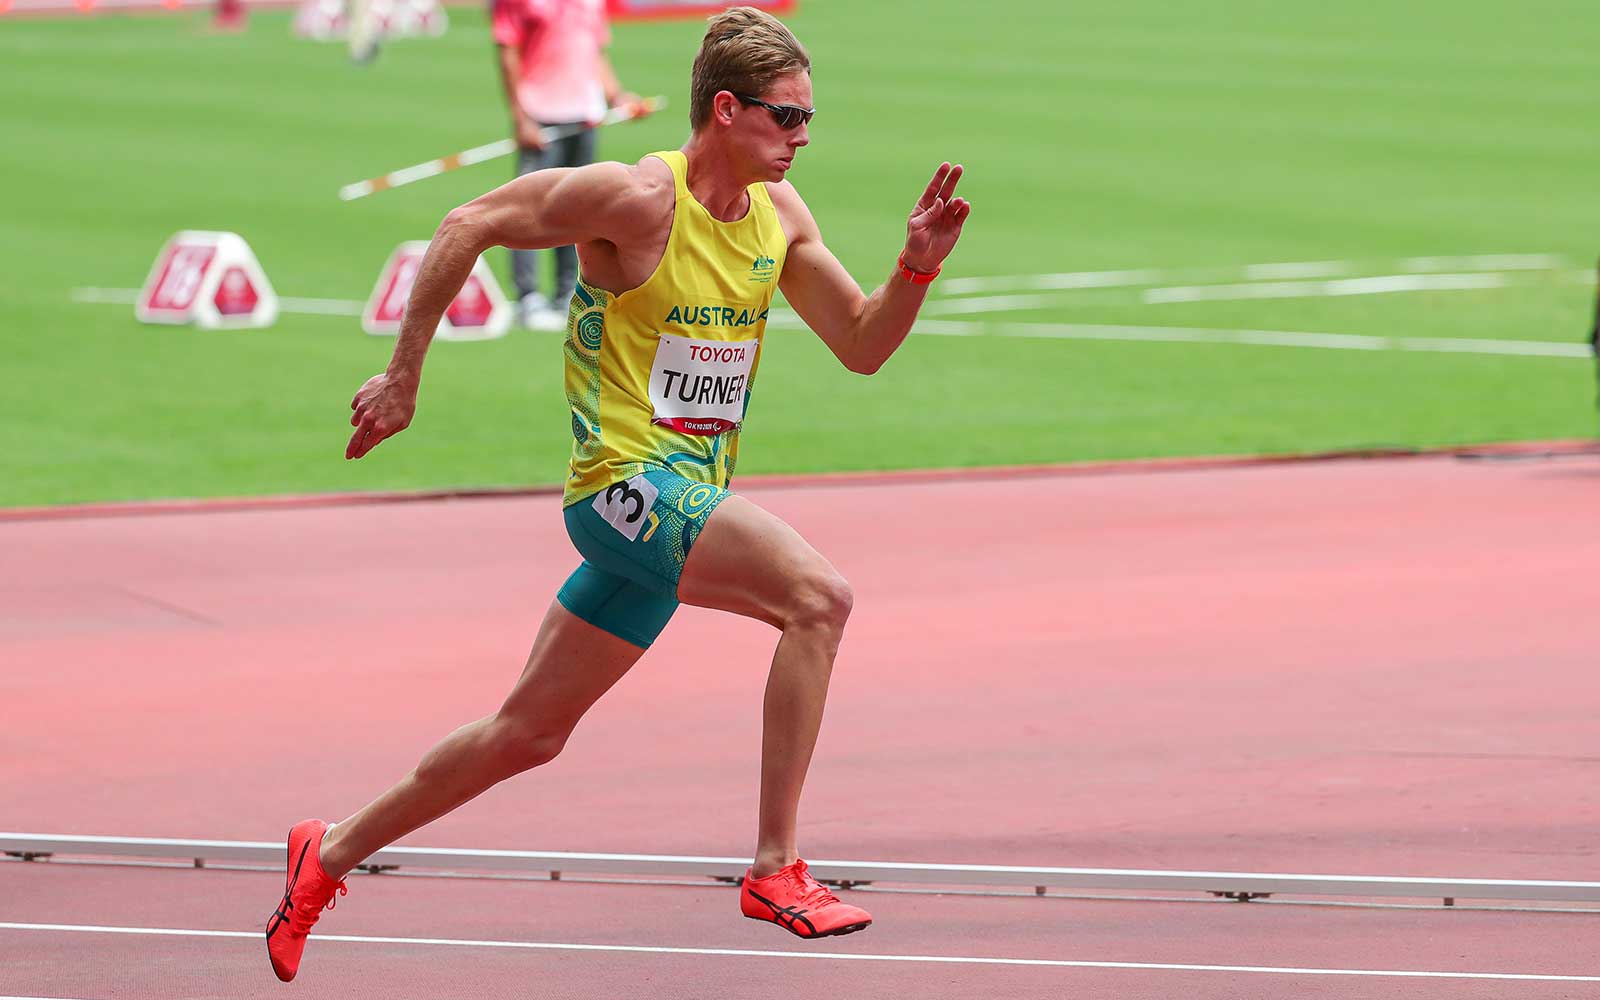 Para-Athletics Day 5 Wrap: Turner’s Golden Run Continues